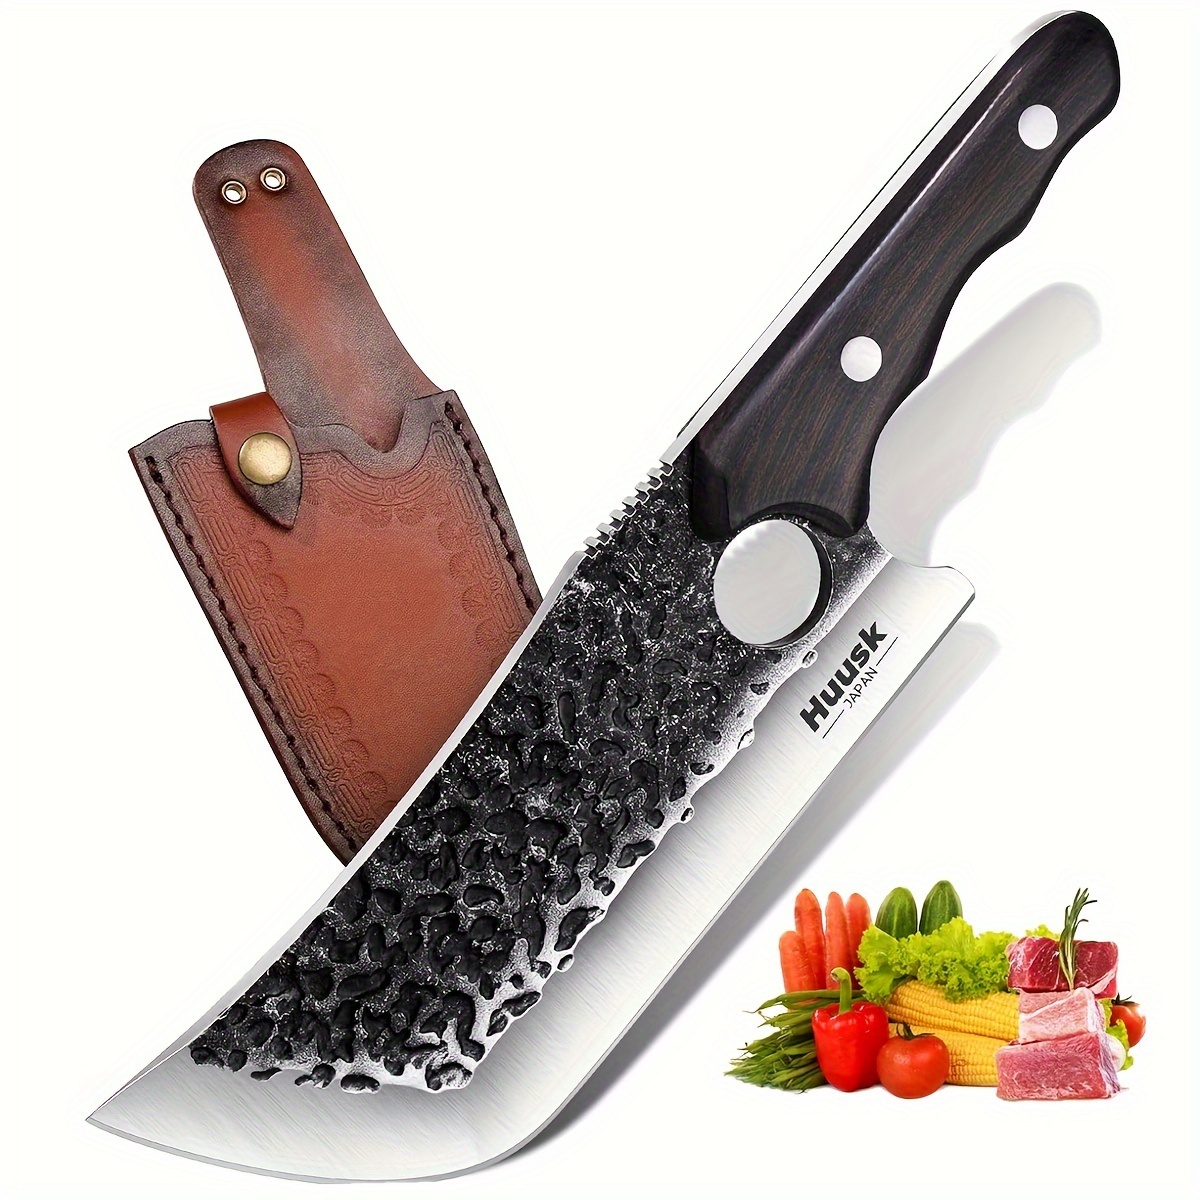 

Forged Meat Cleaver Knife With Sheath Full Tang Butcher Knife For Meat Cutting Viking Knife For Vegetables, Kitchen Knife For Bbq Camping Outdoor Thanksgiving Christmas Gift